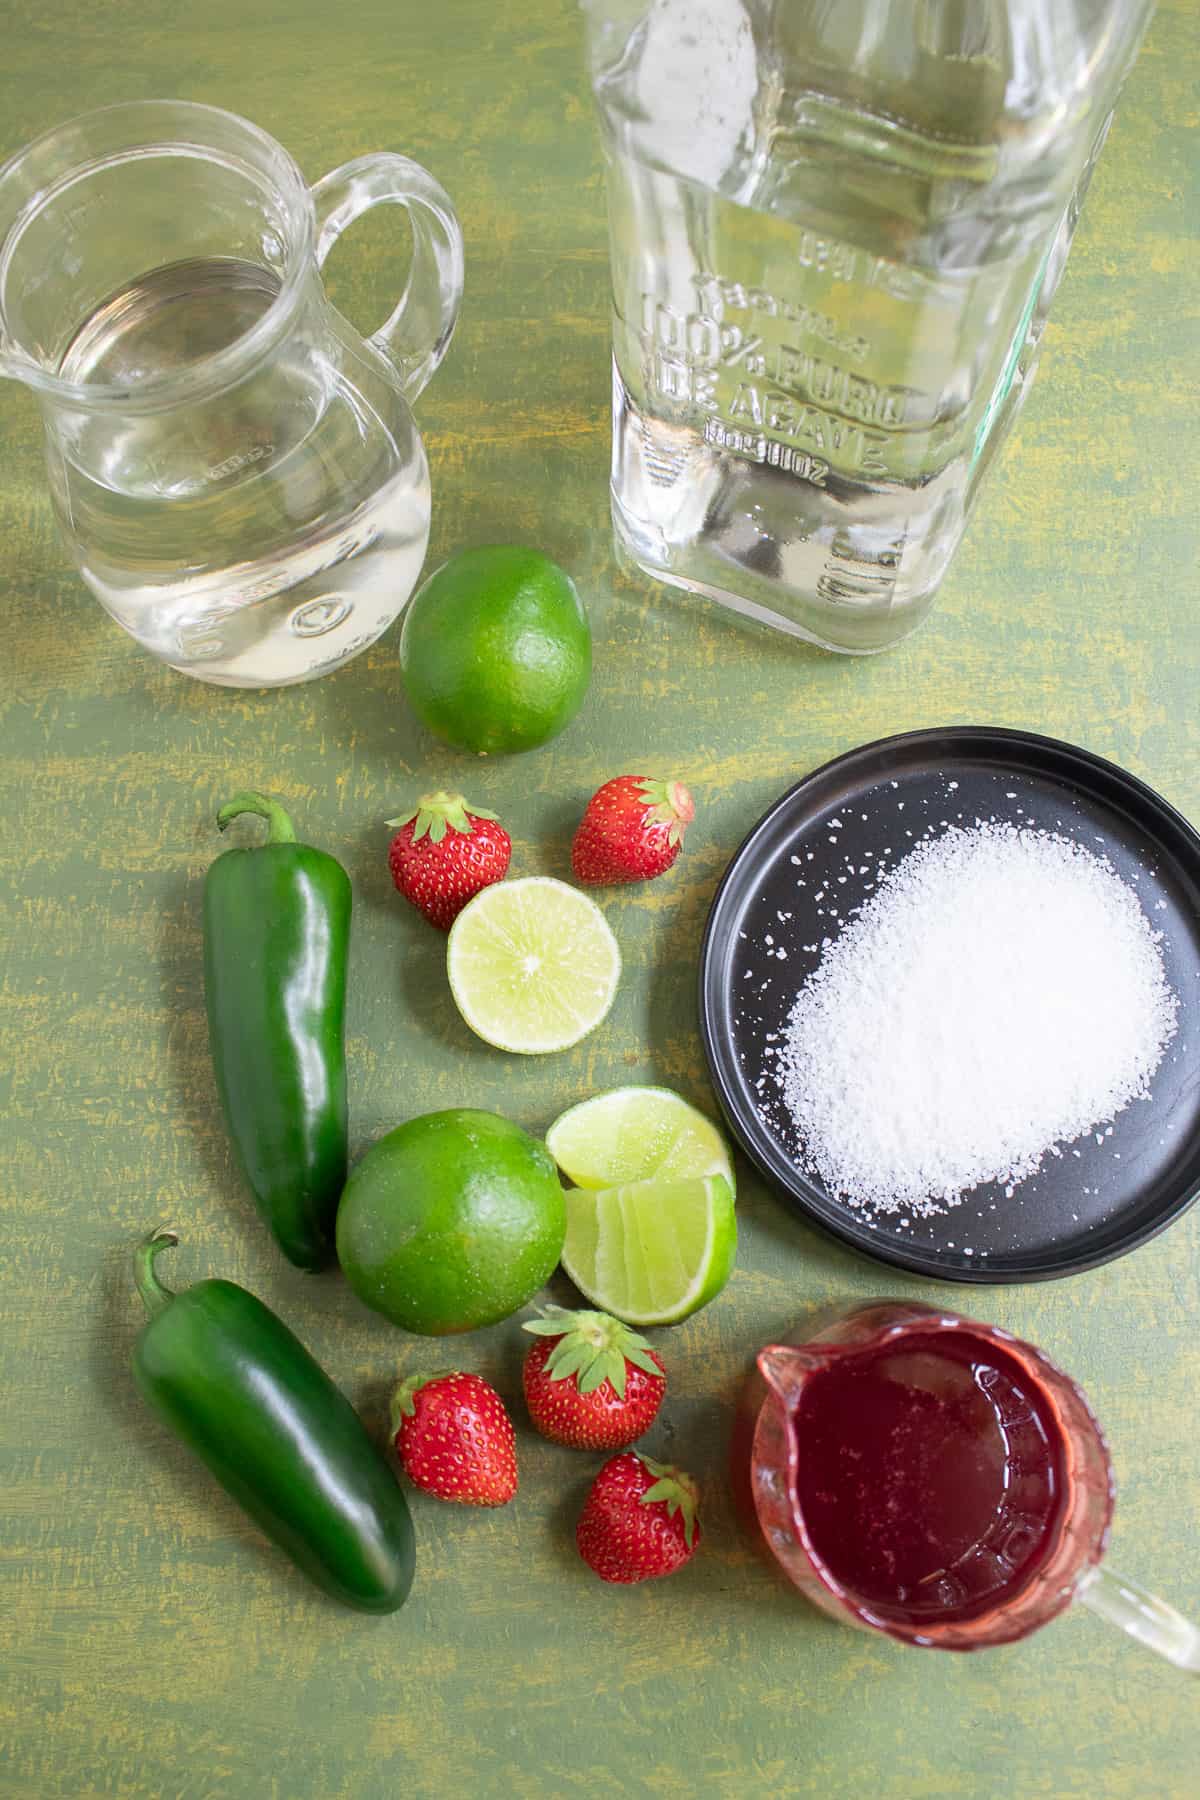 Ingredients for the strawberry jalapeno margaritas arranged on a green surface.